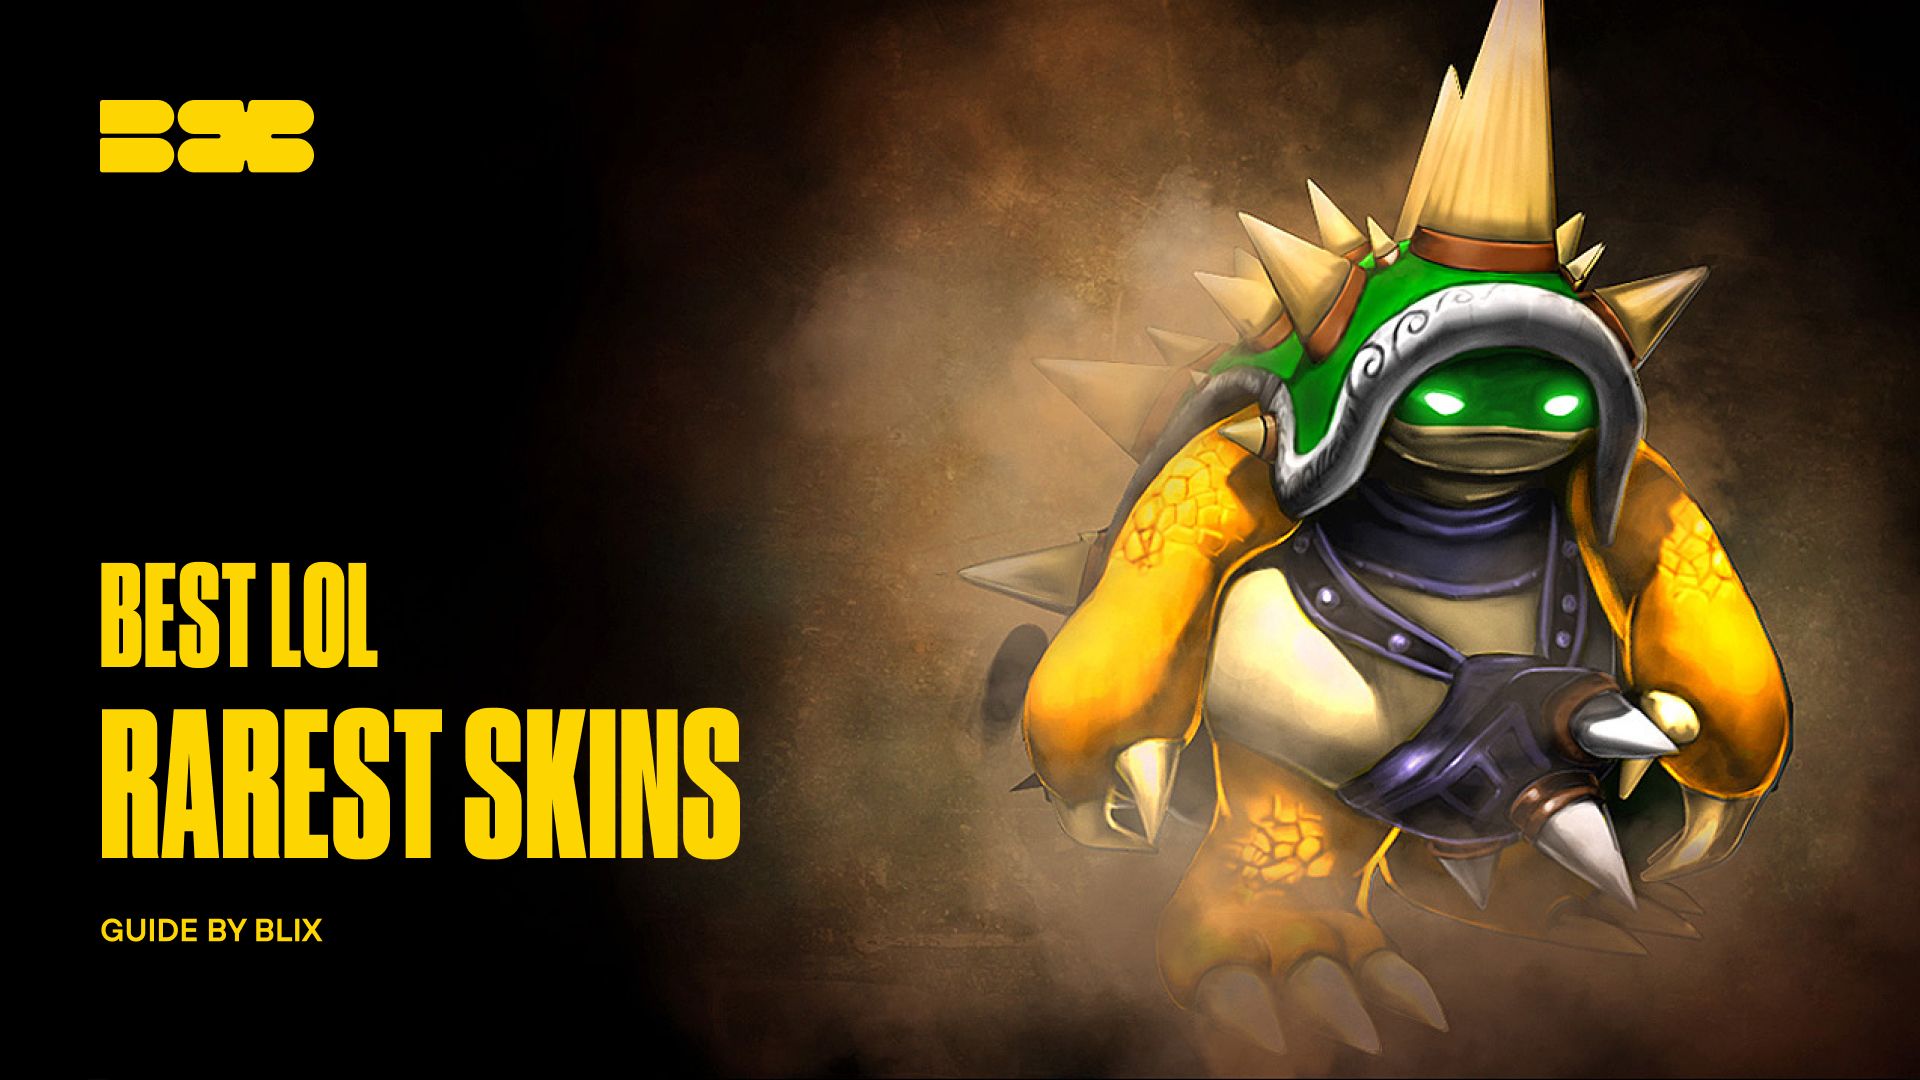 Lunar Revel League of Legends skins finally available in the